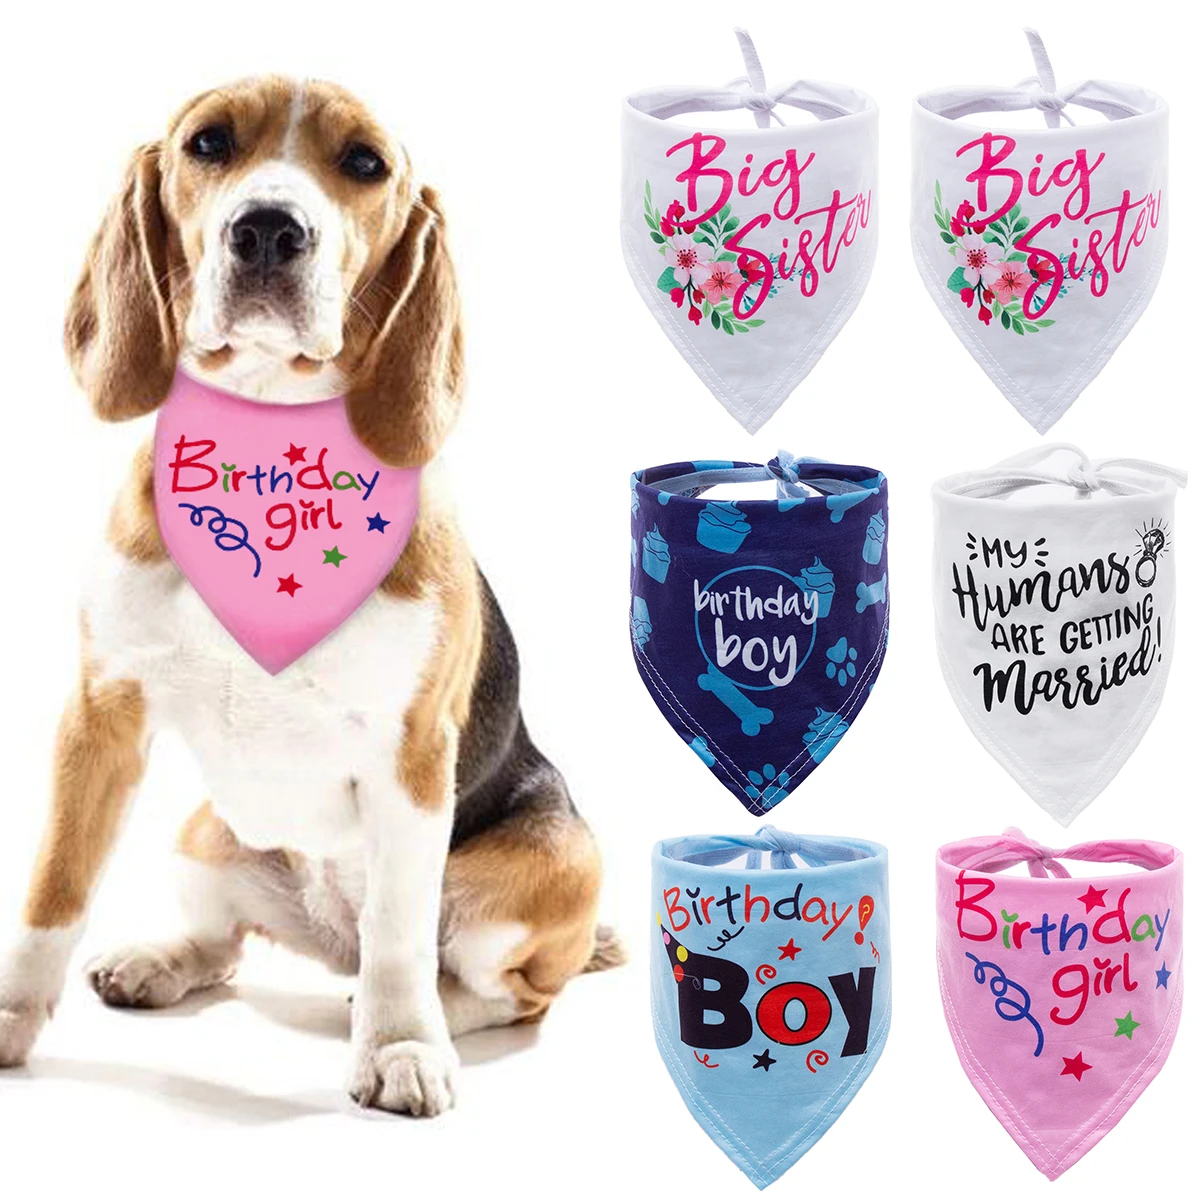 

Dog Bandana Bibs Head Scarf 6 colors Doggie Neckerchief Pet Cat Puppies Accessories Birthday Party Cute Lovely Gog Accessories